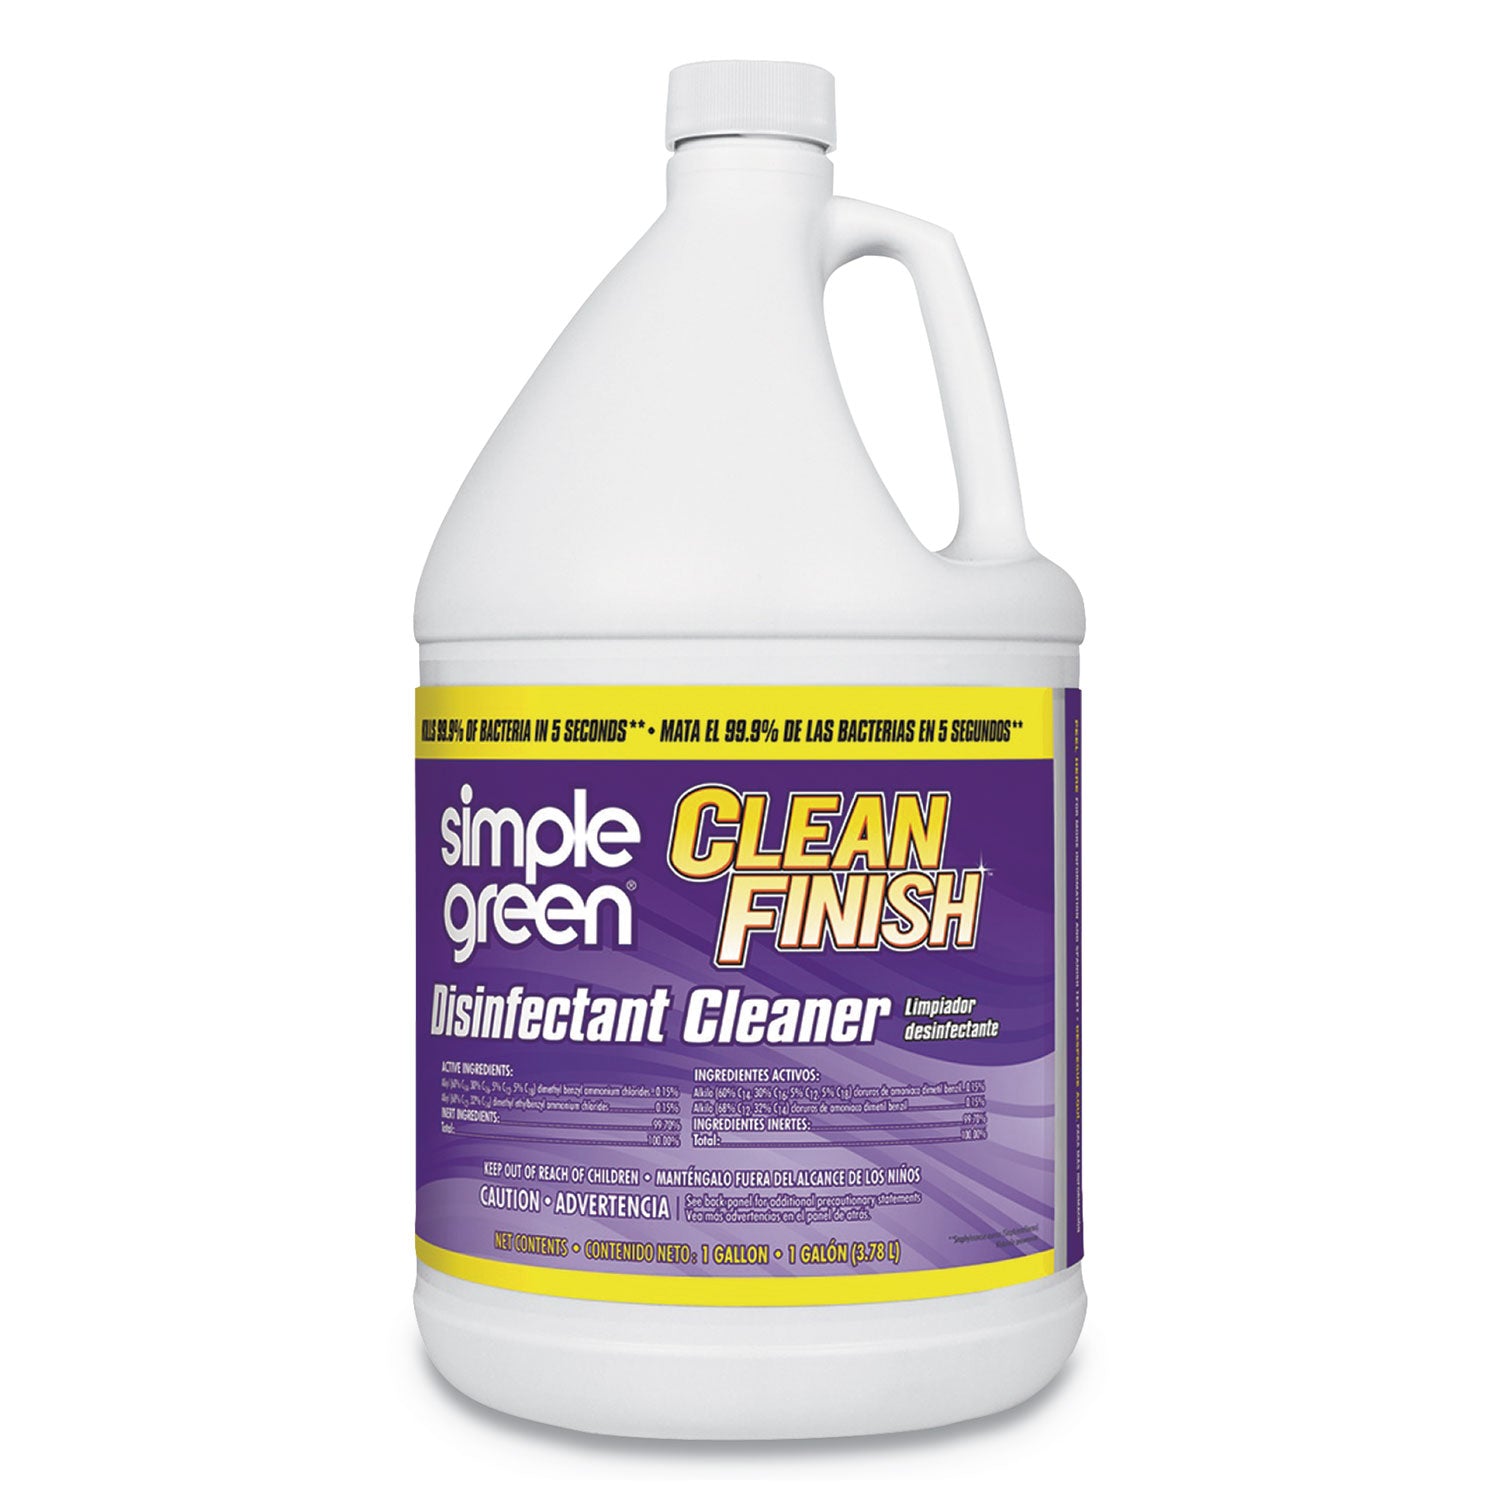 clean-finish-disinfectant-cleaner-1-gal-bottle-herbal_smp01128ea - 1